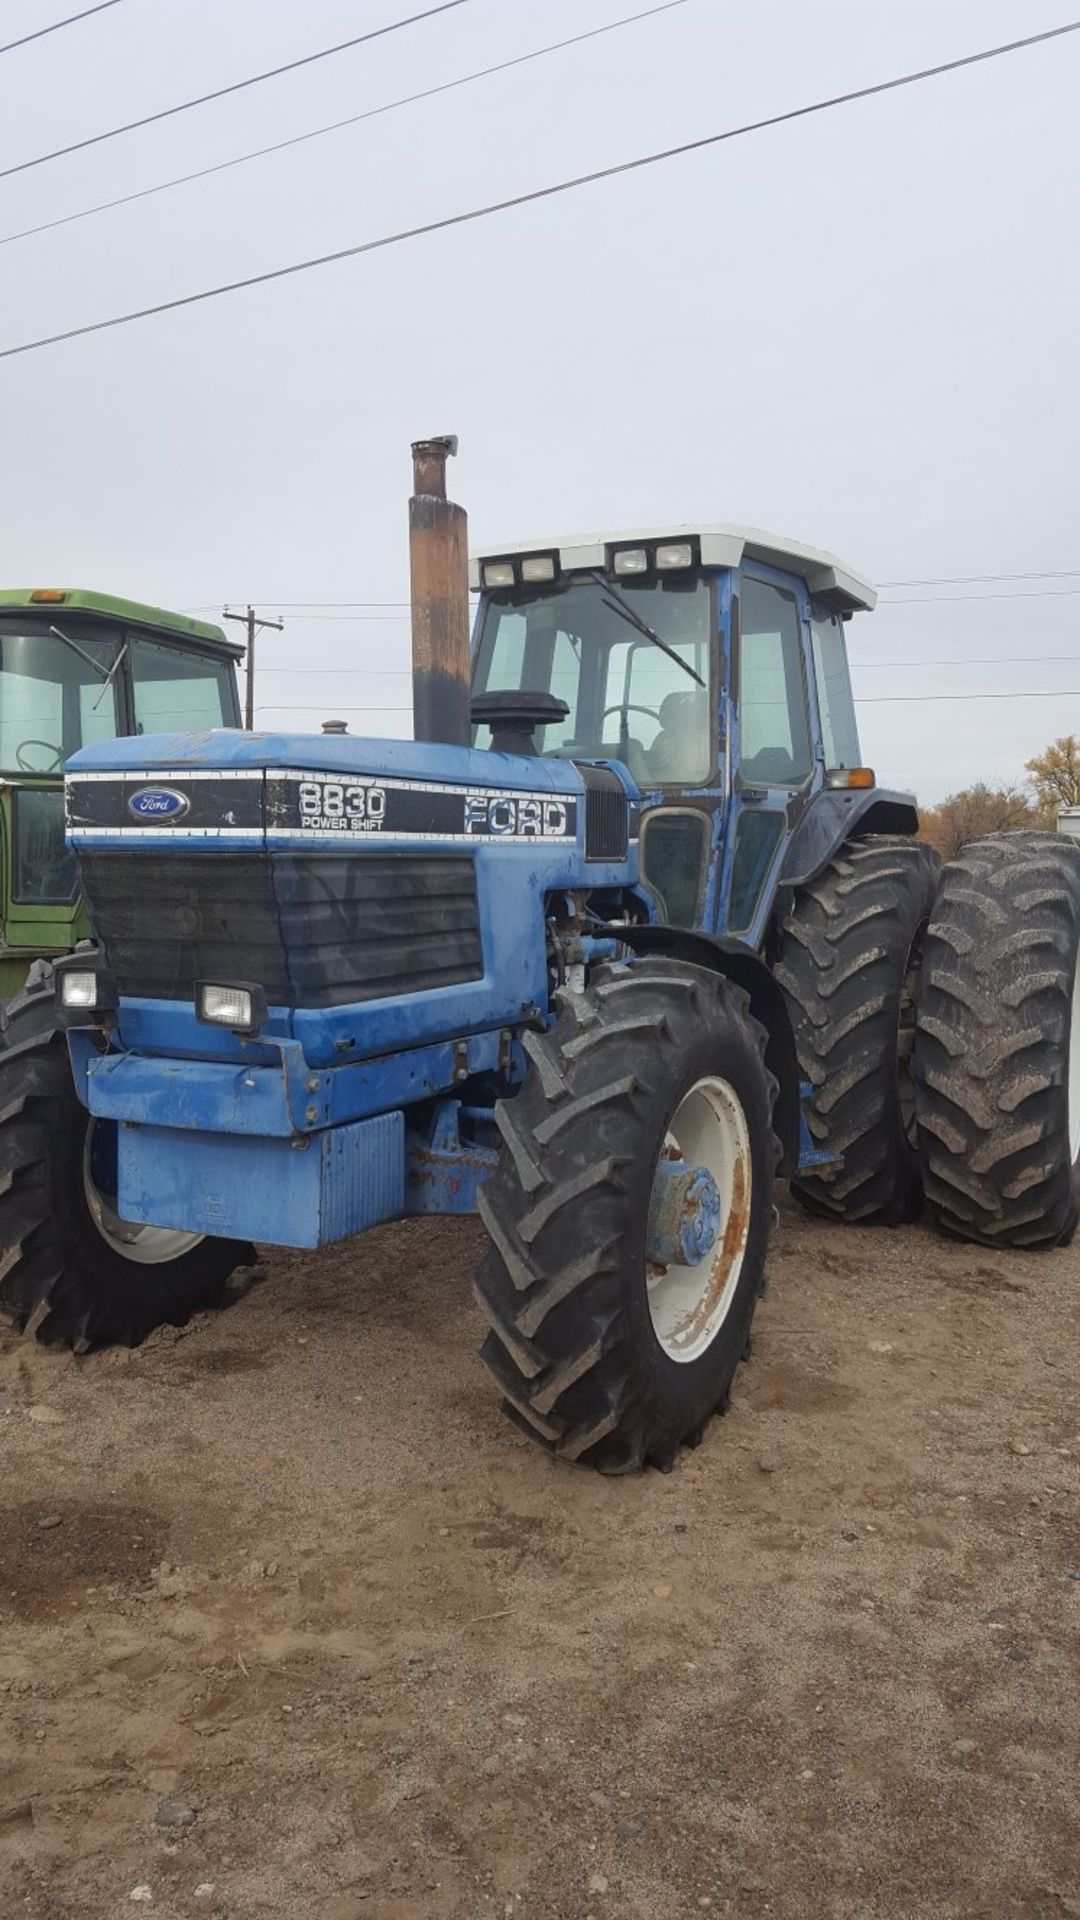 Ford 8830 MFWD power shift trans, 3 hyd. Remotes, 18.4x38 ps dual Rubber weights Runs good 8700hr